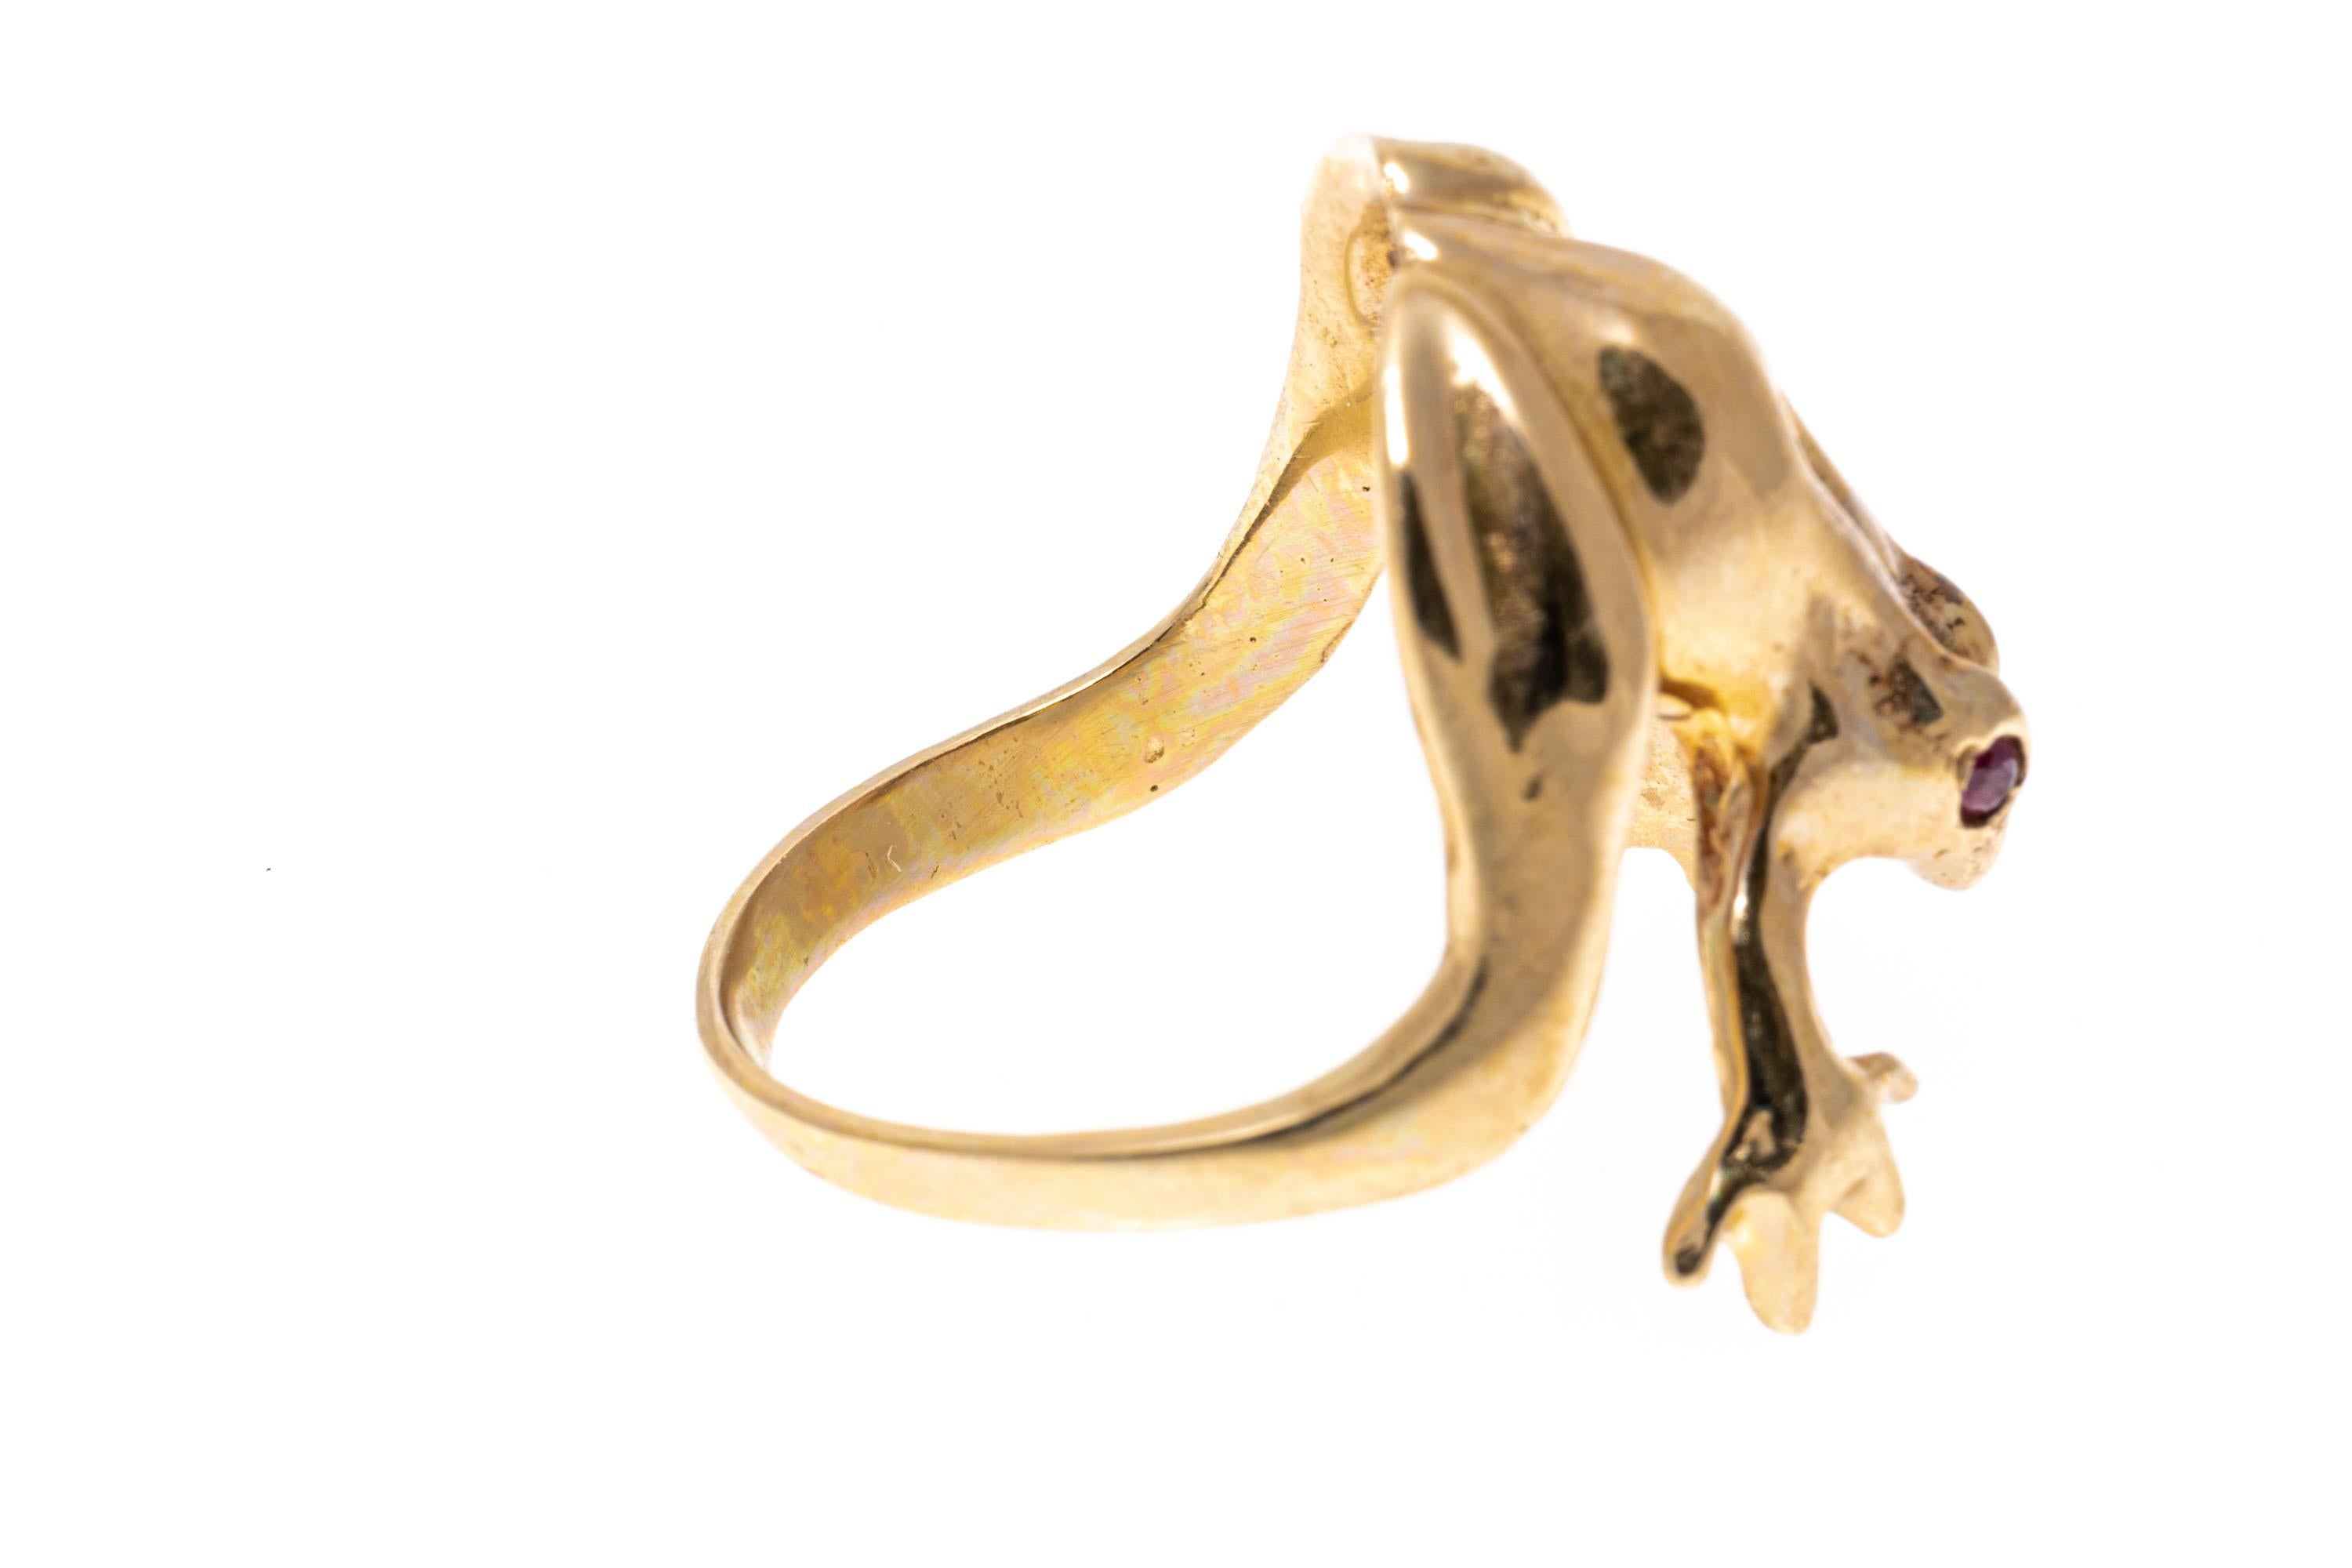 14k yellow gold ring. This charming ring is a frog motif, with a high polished finish, and decorated by round faceted ruby eyes, approximately 0.06 TCW.
Marks: 14k
Dimensions: 5/8